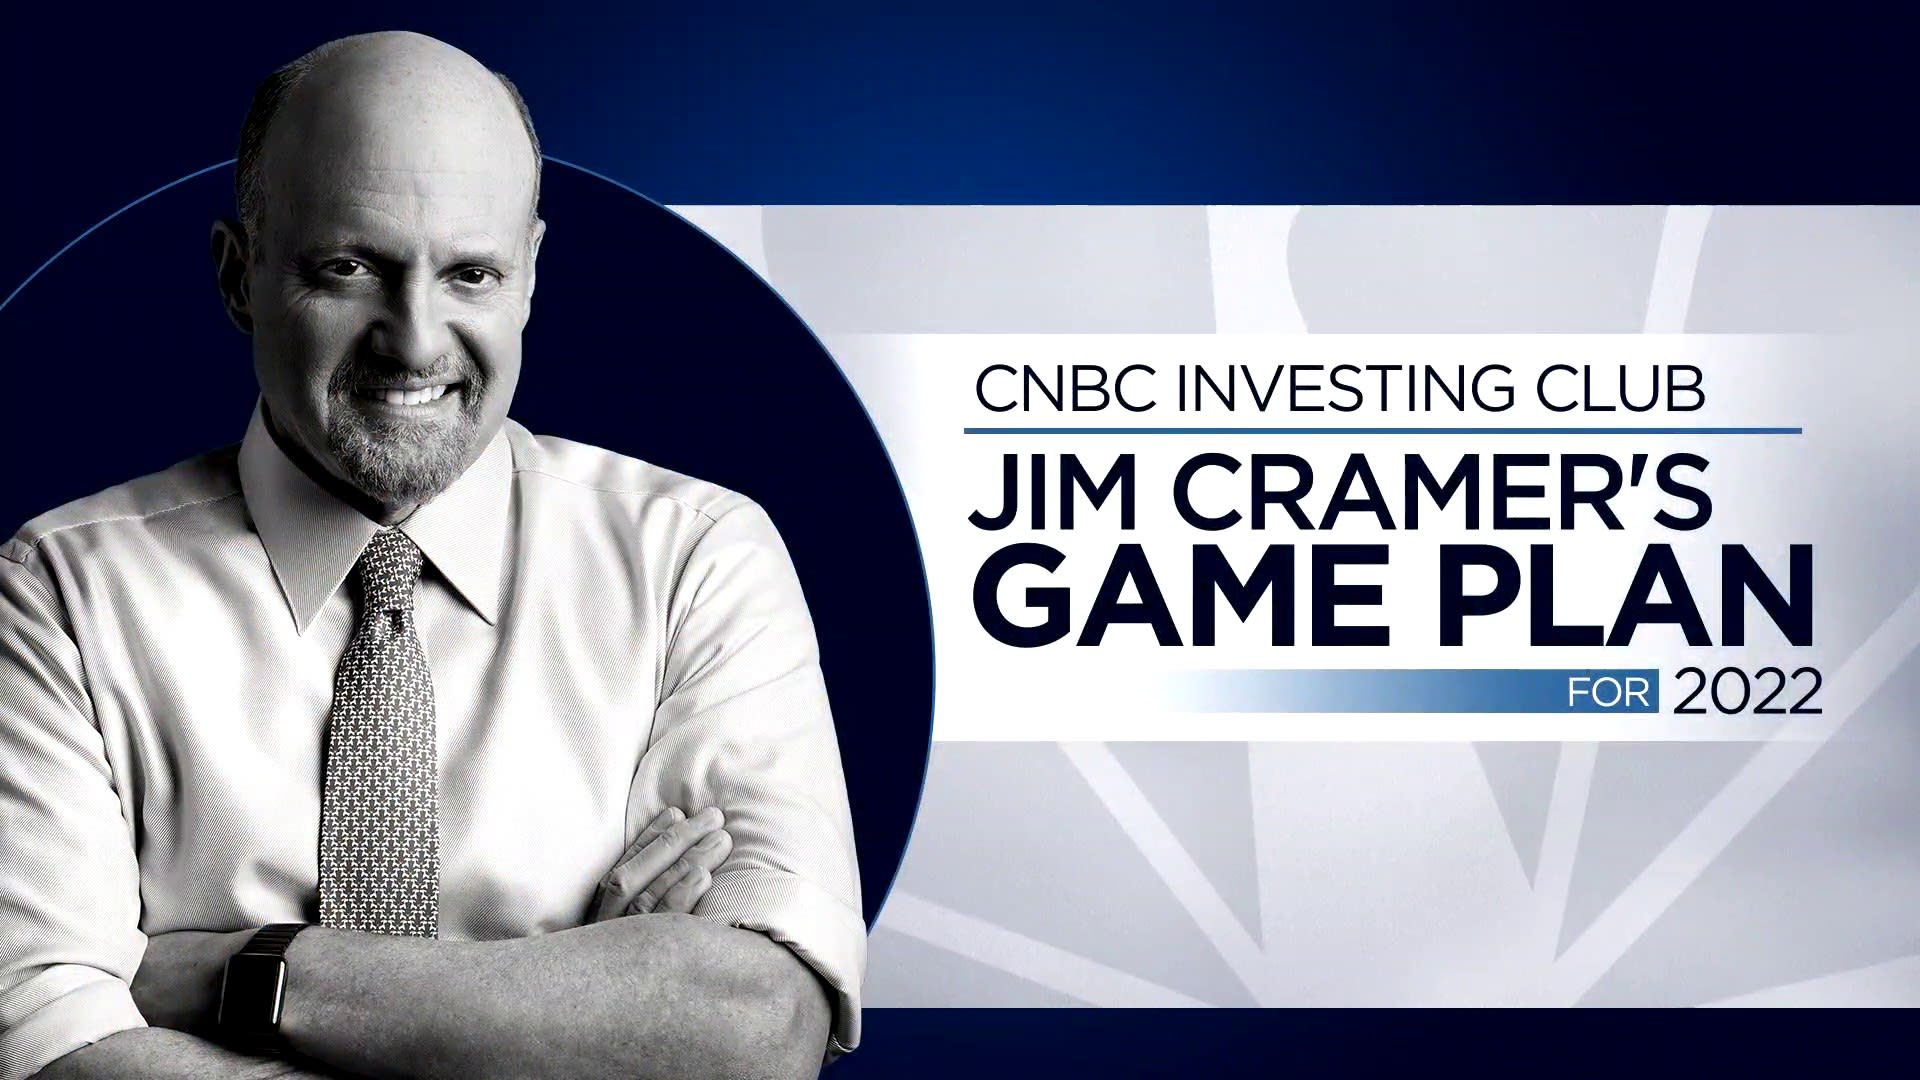 Jim Cramer shares his 2022 game plan and best stock ideas with CNBC Investing Club